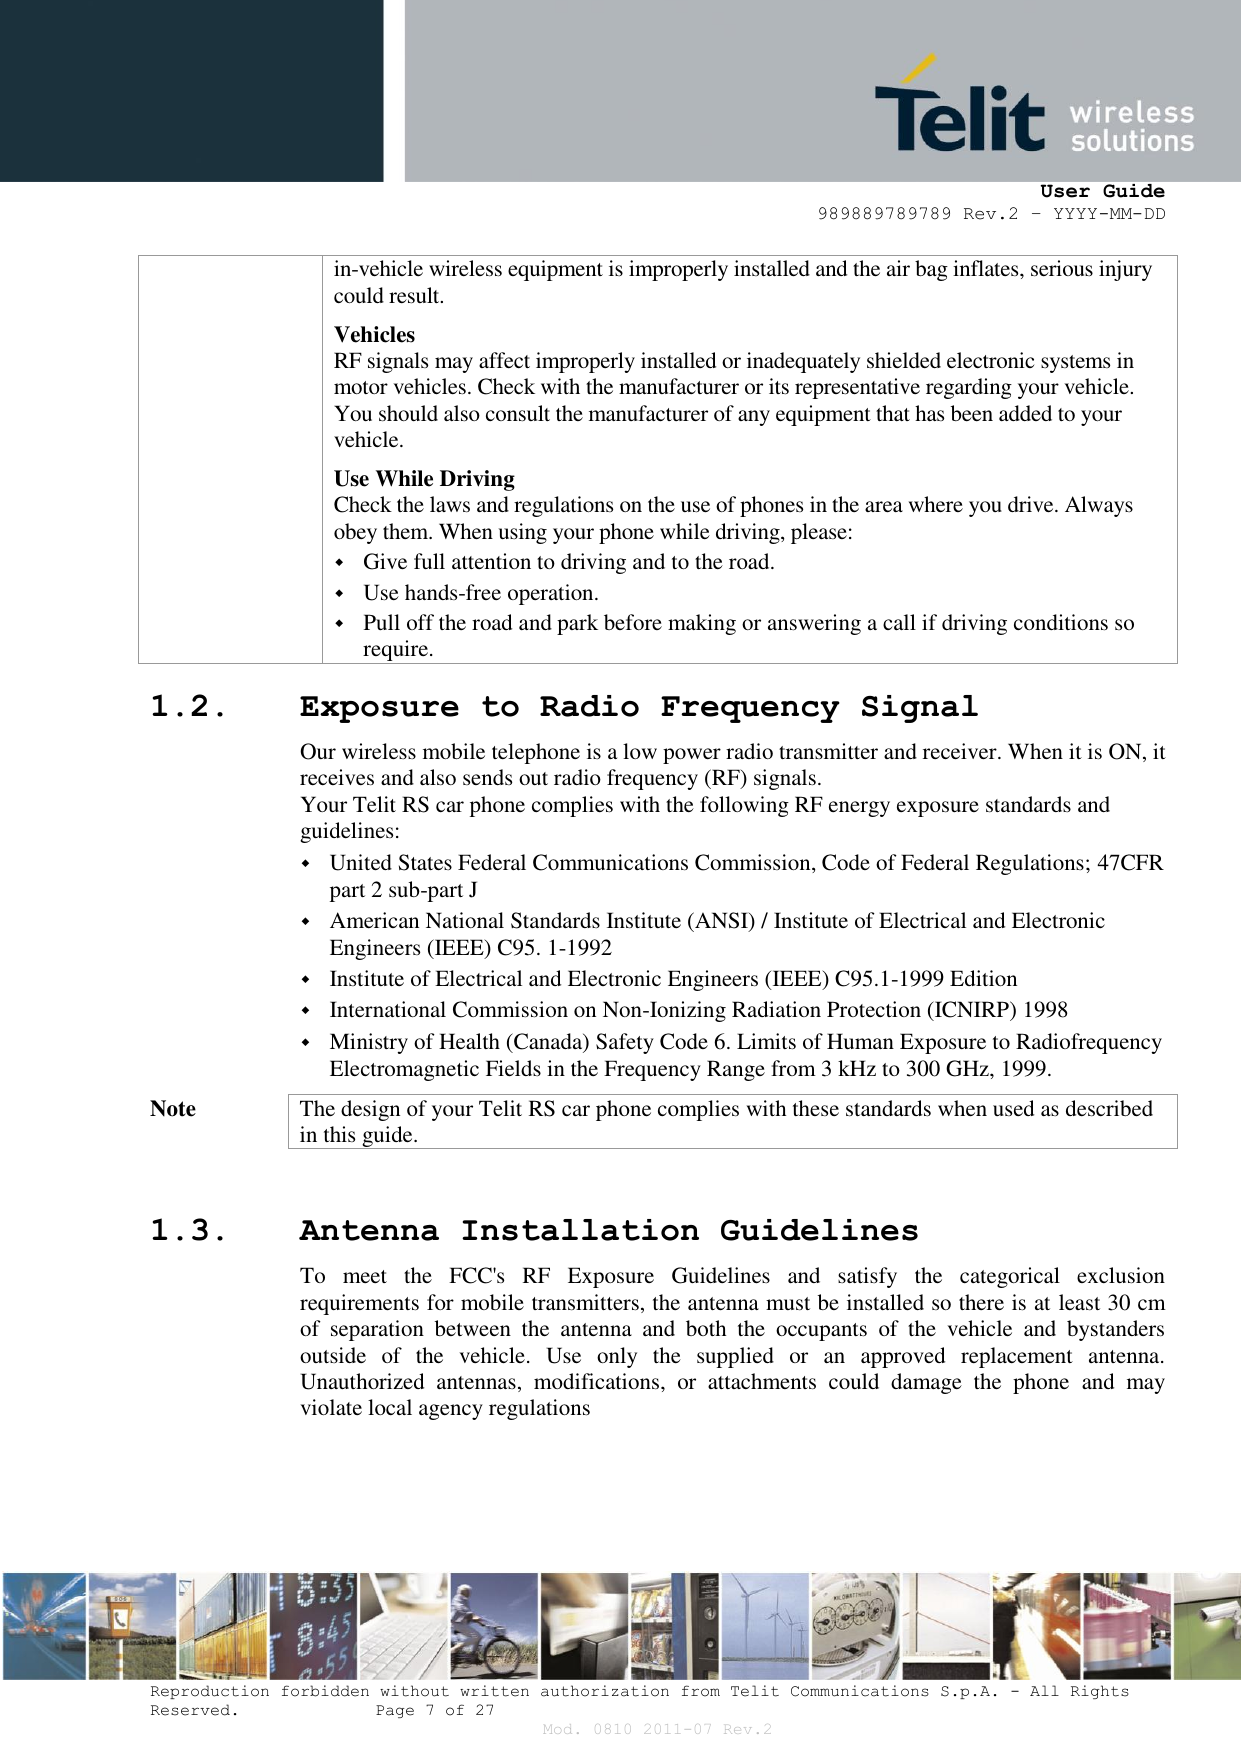      User Guide 989889789789 Rev.2 – YYYY-MM-DD  Reproduction forbidden without written authorization from Telit Communications S.p.A. - All Rights Reserved.    Page 7 of 27 Mod. 0810 2011-07 Rev.2 in-vehicle wireless equipment is improperly installed and the air bag inflates, serious injury could result. Vehicles RF signals may affect improperly installed or inadequately shielded electronic systems in motor vehicles. Check with the manufacturer or its representative regarding your vehicle. You should also consult the manufacturer of any equipment that has been added to your vehicle. Use While Driving Check the laws and regulations on the use of phones in the area where you drive. Always obey them. When using your phone while driving, please:  Give full attention to driving and to the road.  Use hands-free operation.  Pull off the road and park before making or answering a call if driving conditions so require. 1.2. Exposure to Radio Frequency Signal Our wireless mobile telephone is a low power radio transmitter and receiver. When it is ON, it receives and also sends out radio frequency (RF) signals. Your Telit RS car phone complies with the following RF energy exposure standards and guidelines:  United States Federal Communications Commission, Code of Federal Regulations; 47CFR part 2 sub-part J  American National Standards Institute (ANSI) / Institute of Electrical and Electronic Engineers (IEEE) C95. 1-1992  Institute of Electrical and Electronic Engineers (IEEE) C95.1-1999 Edition  International Commission on Non-Ionizing Radiation Protection (ICNIRP) 1998  Ministry of Health (Canada) Safety Code 6. Limits of Human Exposure to Radiofrequency Electromagnetic Fields in the Frequency Range from 3 kHz to 300 GHz, 1999. Note The design of your Telit RS car phone complies with these standards when used as described in this guide.  1.3. Antenna Installation Guidelines To  meet  the  FCC&apos;s  RF  Exposure  Guidelines  and  satisfy  the  categorical  exclusion requirements for mobile transmitters, the antenna must be installed so there is at least 30 cm of  separation  between  the  antenna  and  both  the  occupants  of  the  vehicle  and  bystanders outside  of  the  vehicle.  Use  only  the  supplied  or  an  approved  replacement  antenna. Unauthorized  antennas,  modifications,  or  attachments  could  damage  the  phone  and  may violate local agency regulations    